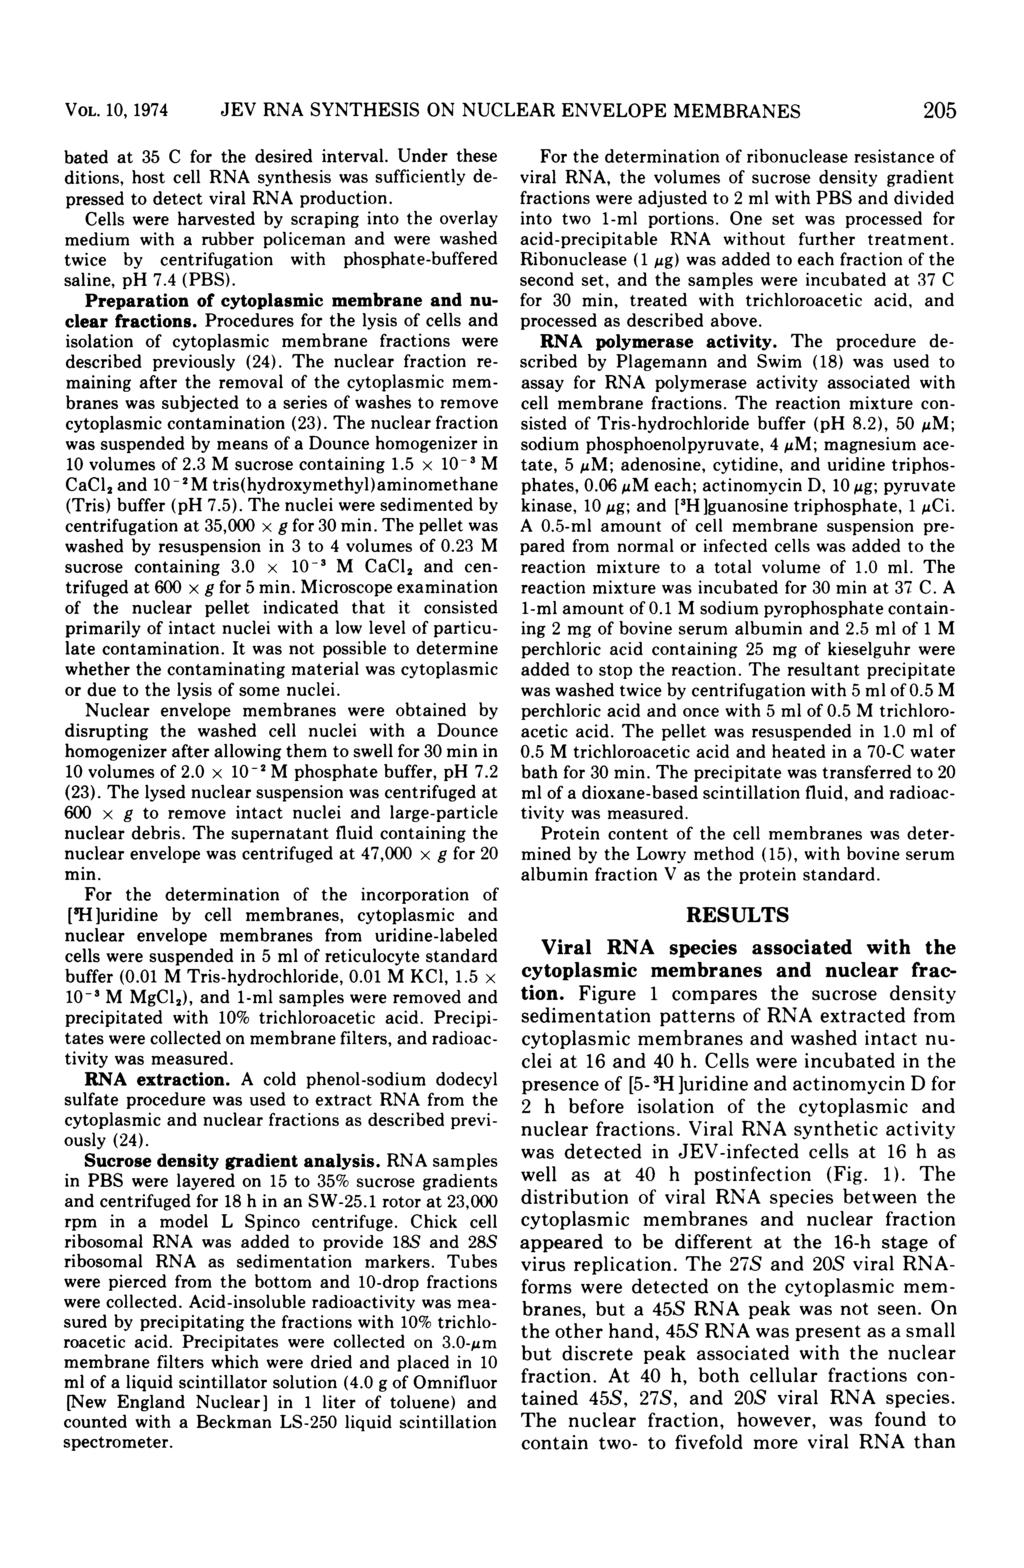 VOL. 10, 1974 JEV RNA SYNTHESIS ON NUCLEAR ENVELOPE MEMBRANES bated at 35 C for the desired interval.